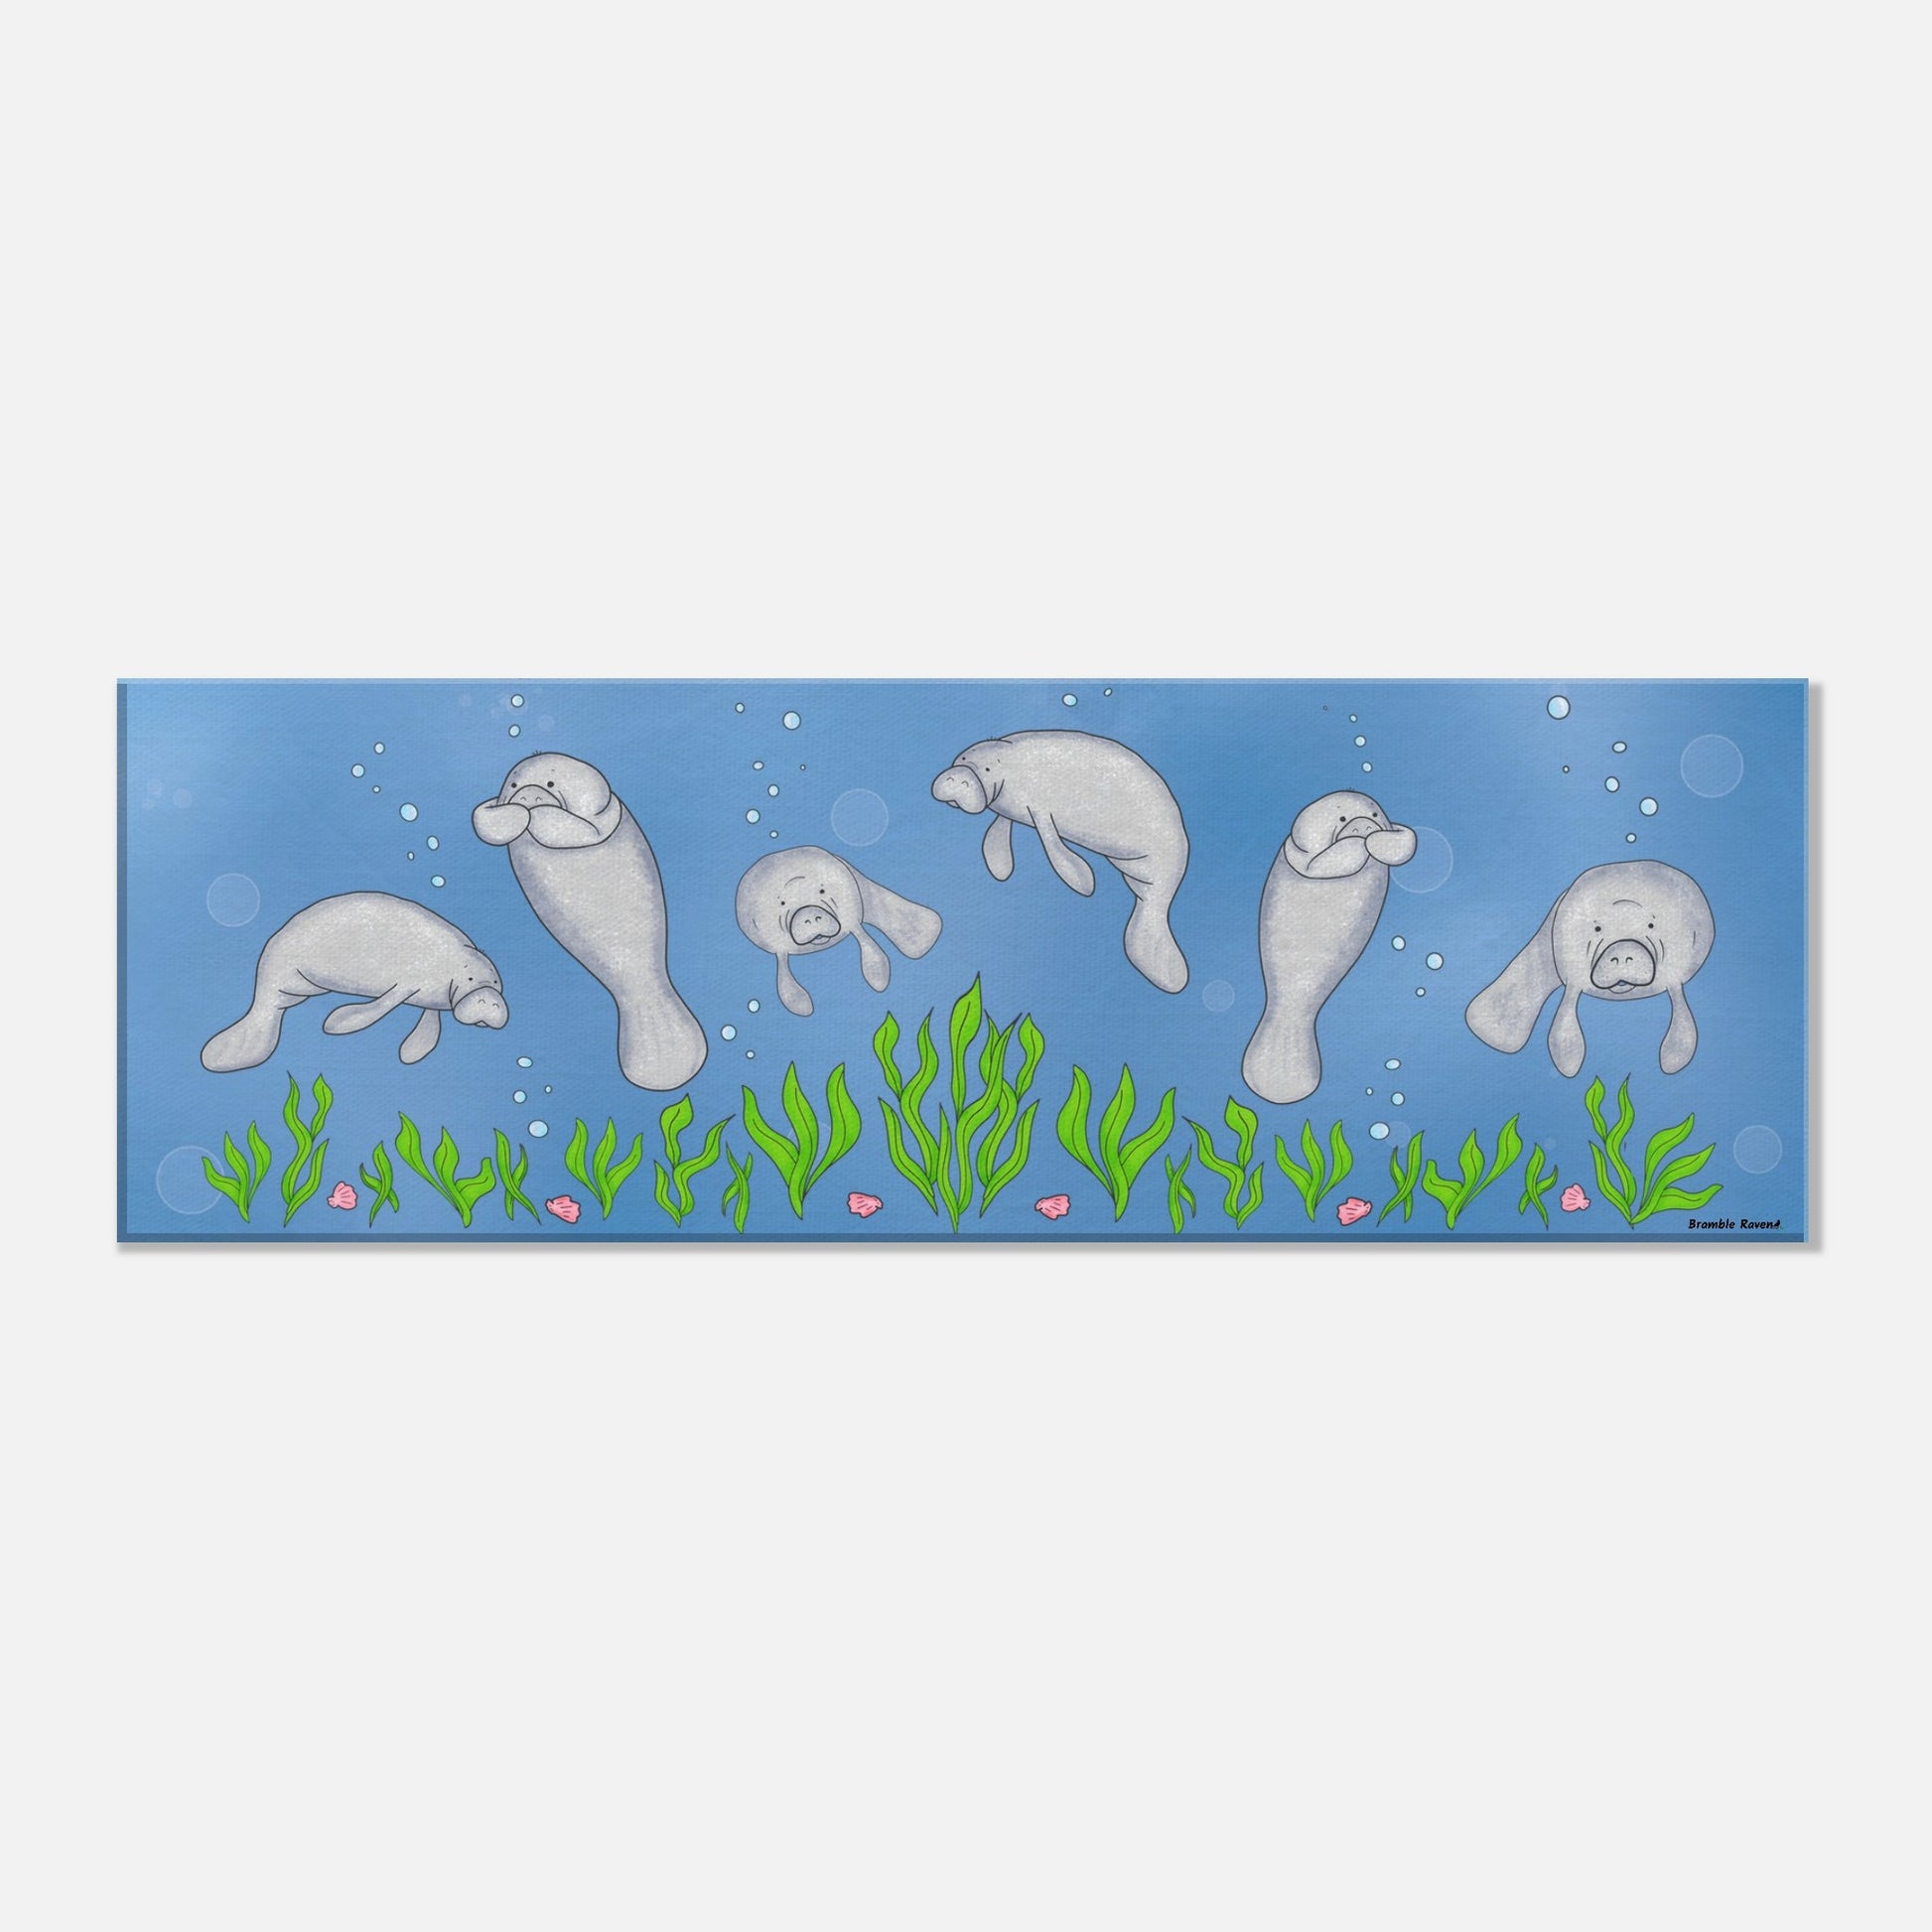 16 by 32 inch slim canvas wall art print featuring cute illustrated manatees swimming above the seabed. Hanging hardware included.